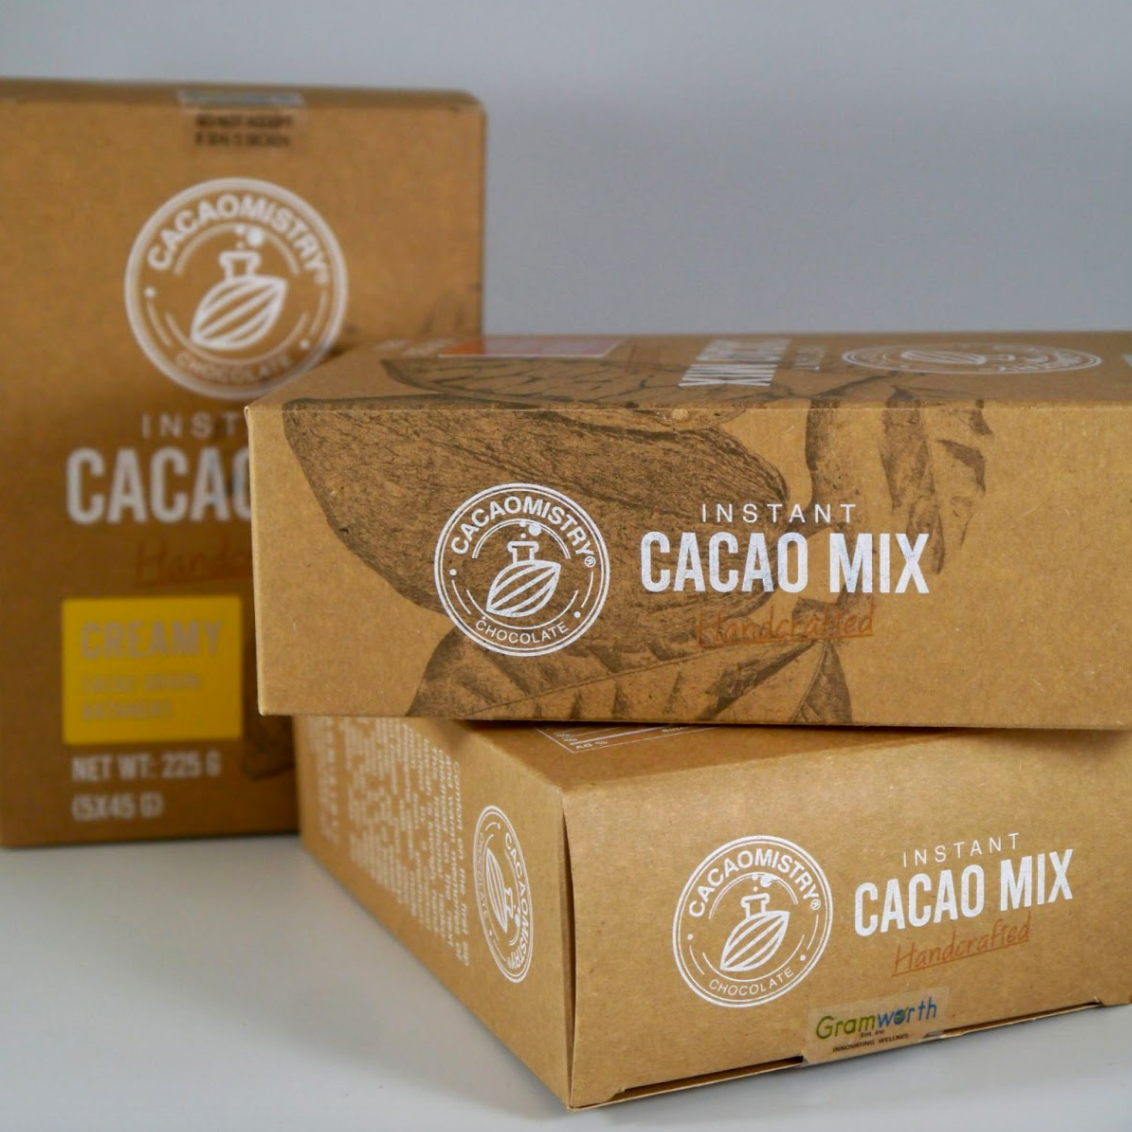 Handcrafted Instant Cacao Mix